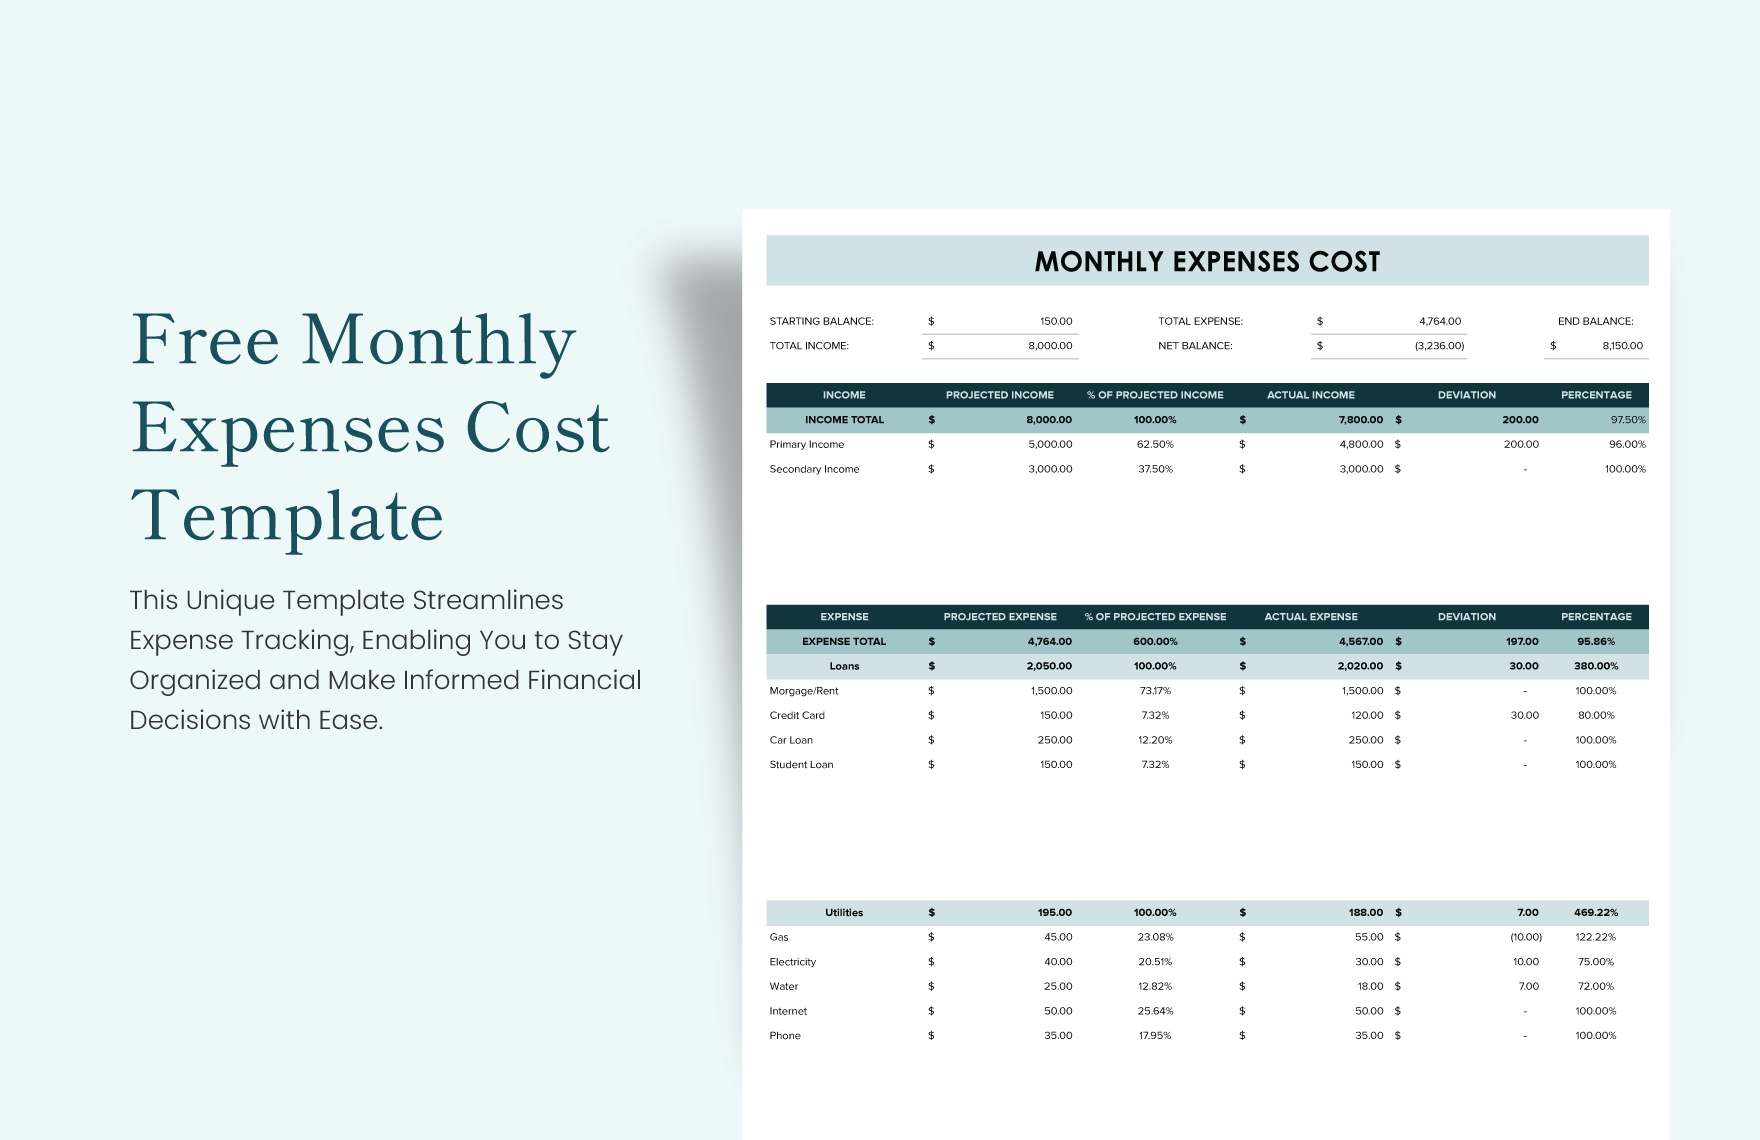 Monthly Expenses Cost Template